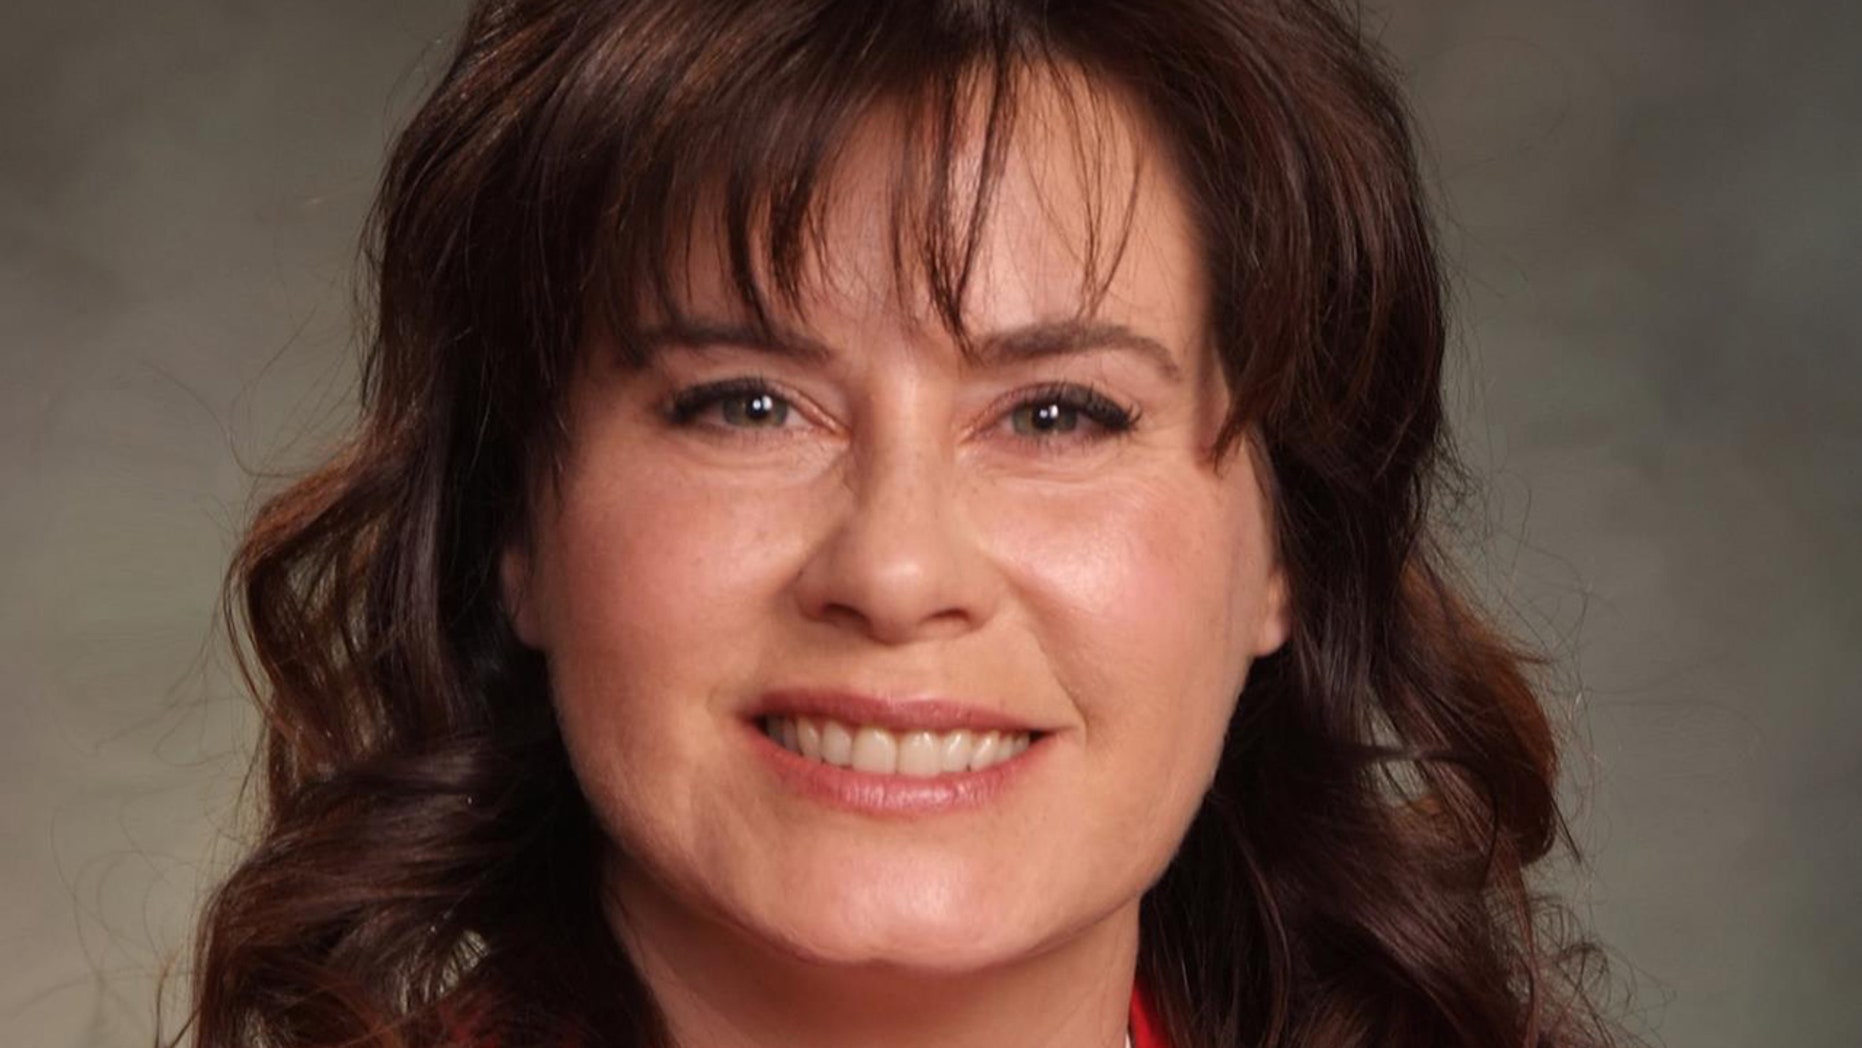 Colorado state lawmaker says blacks, whites lynched 